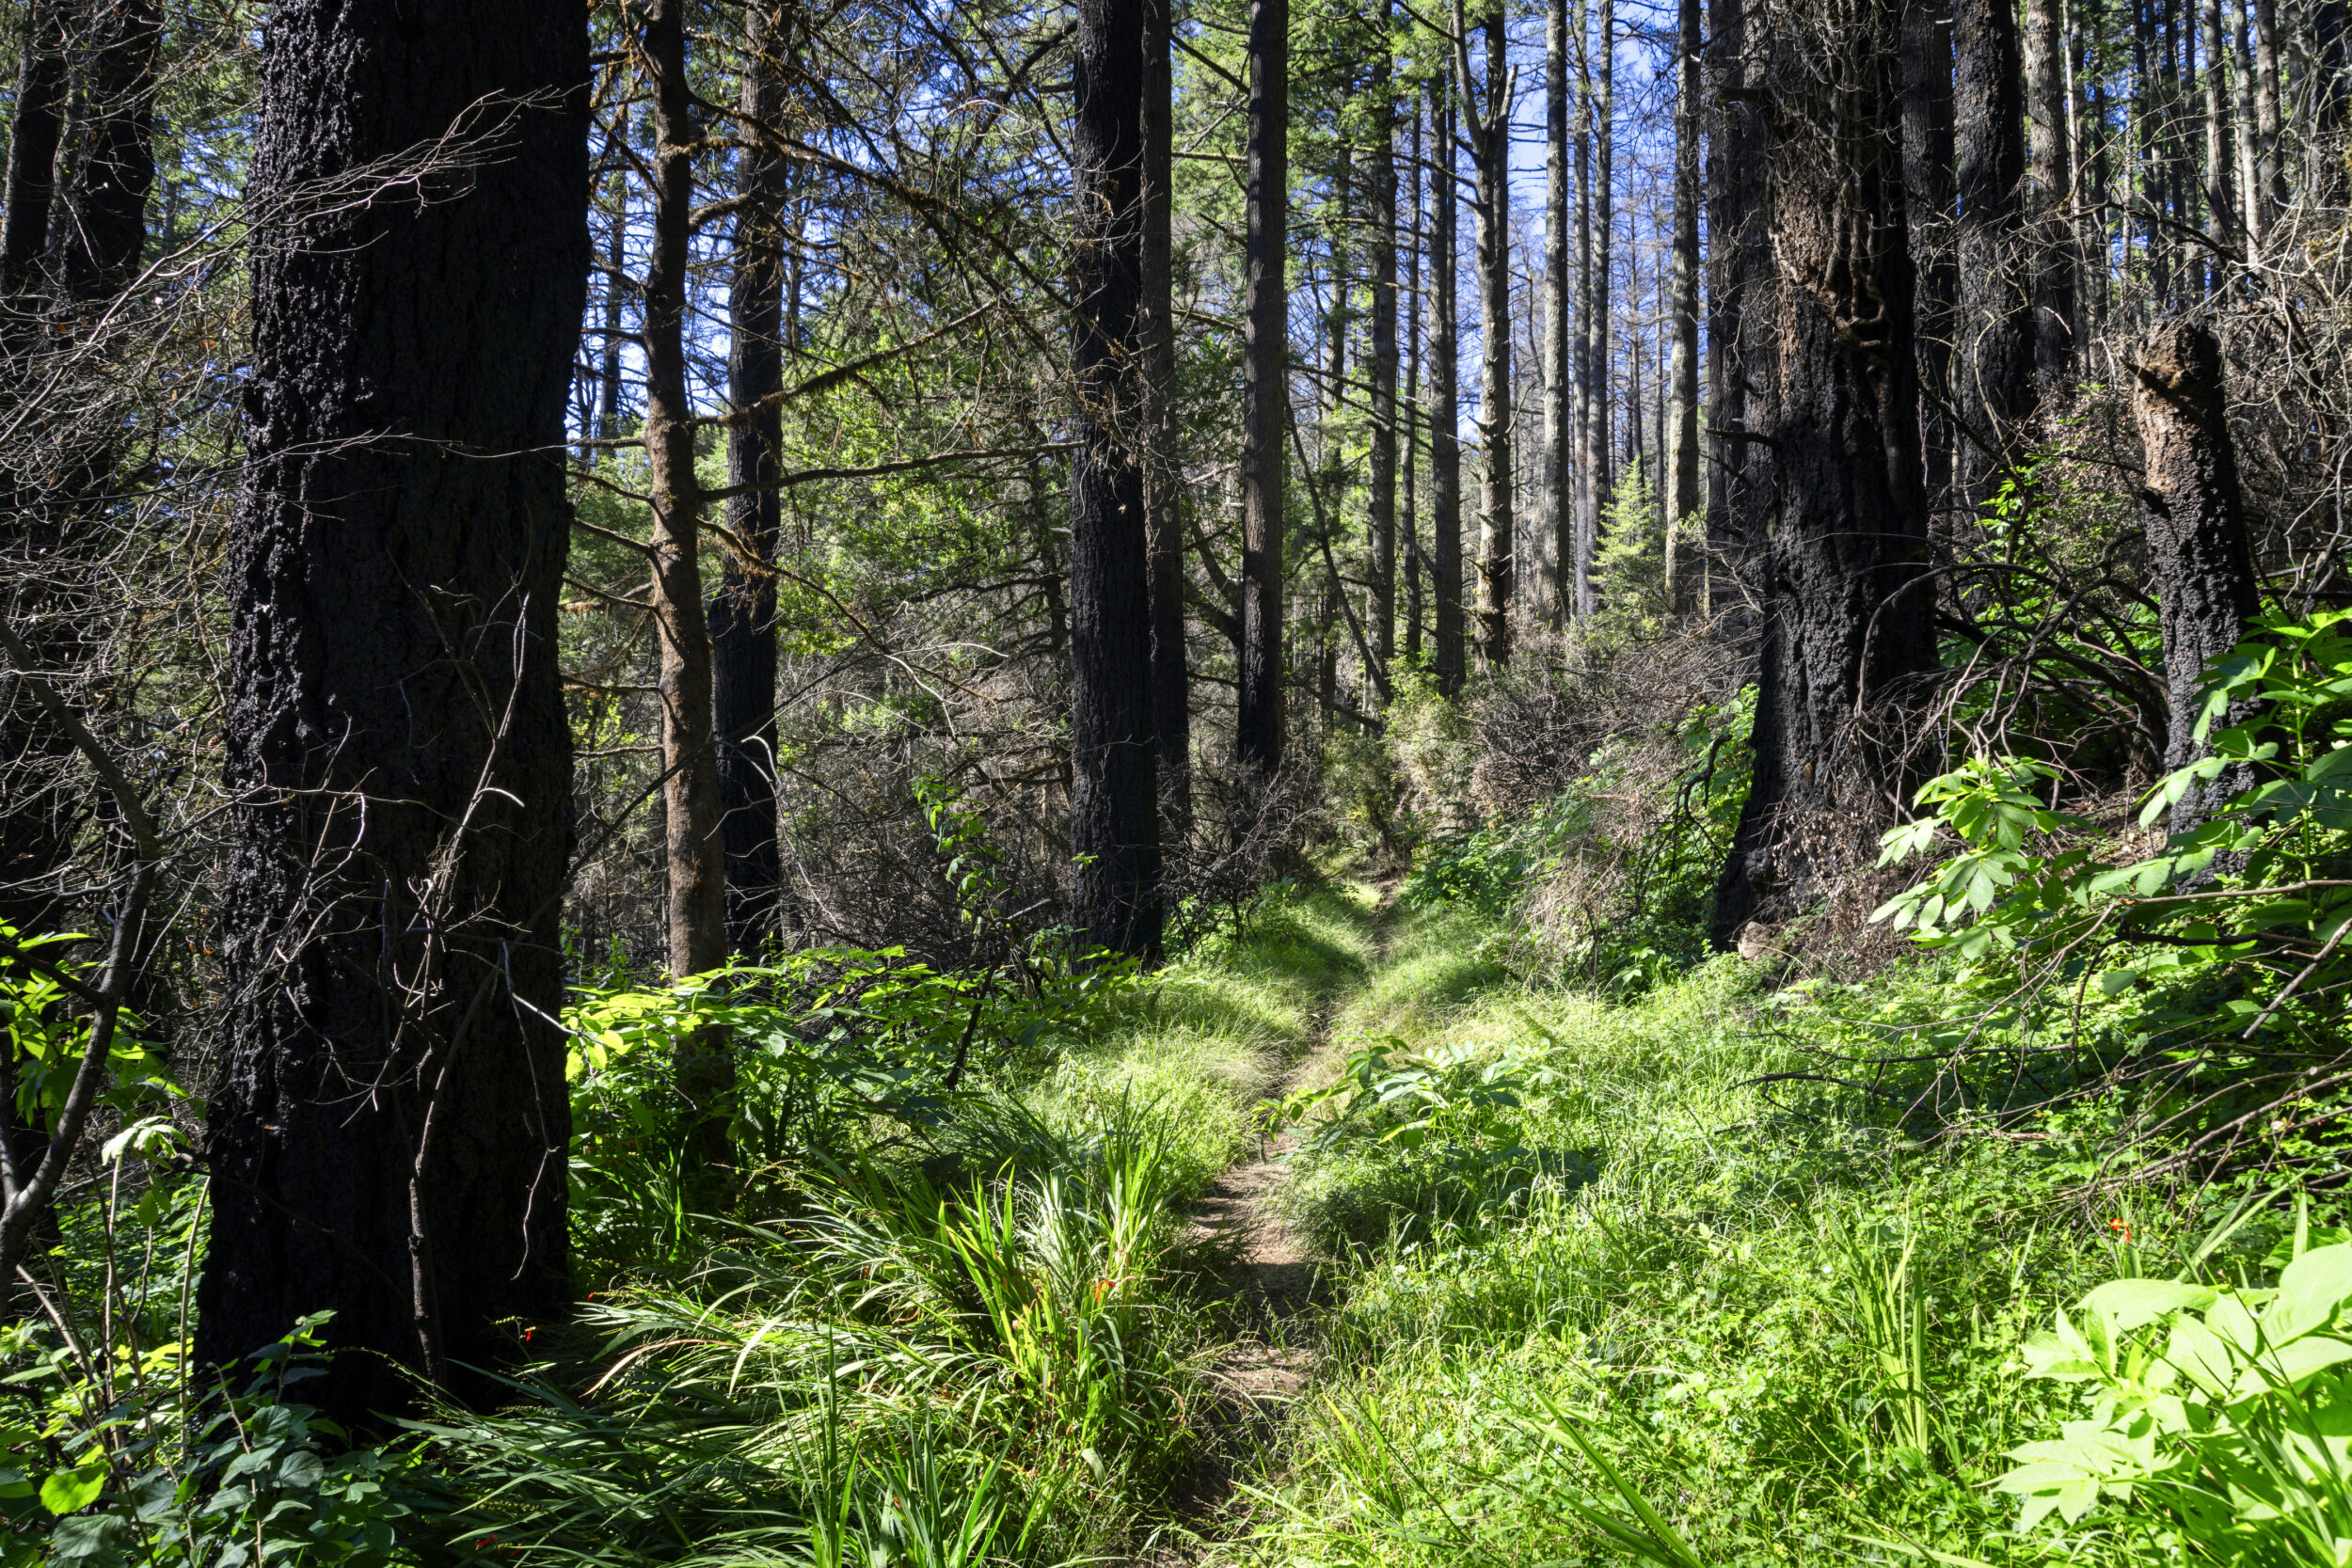 A narrow, grassy trail winds through a dense forest with tall, dark tree trunks and bright green foliage illuminated by sunlight.